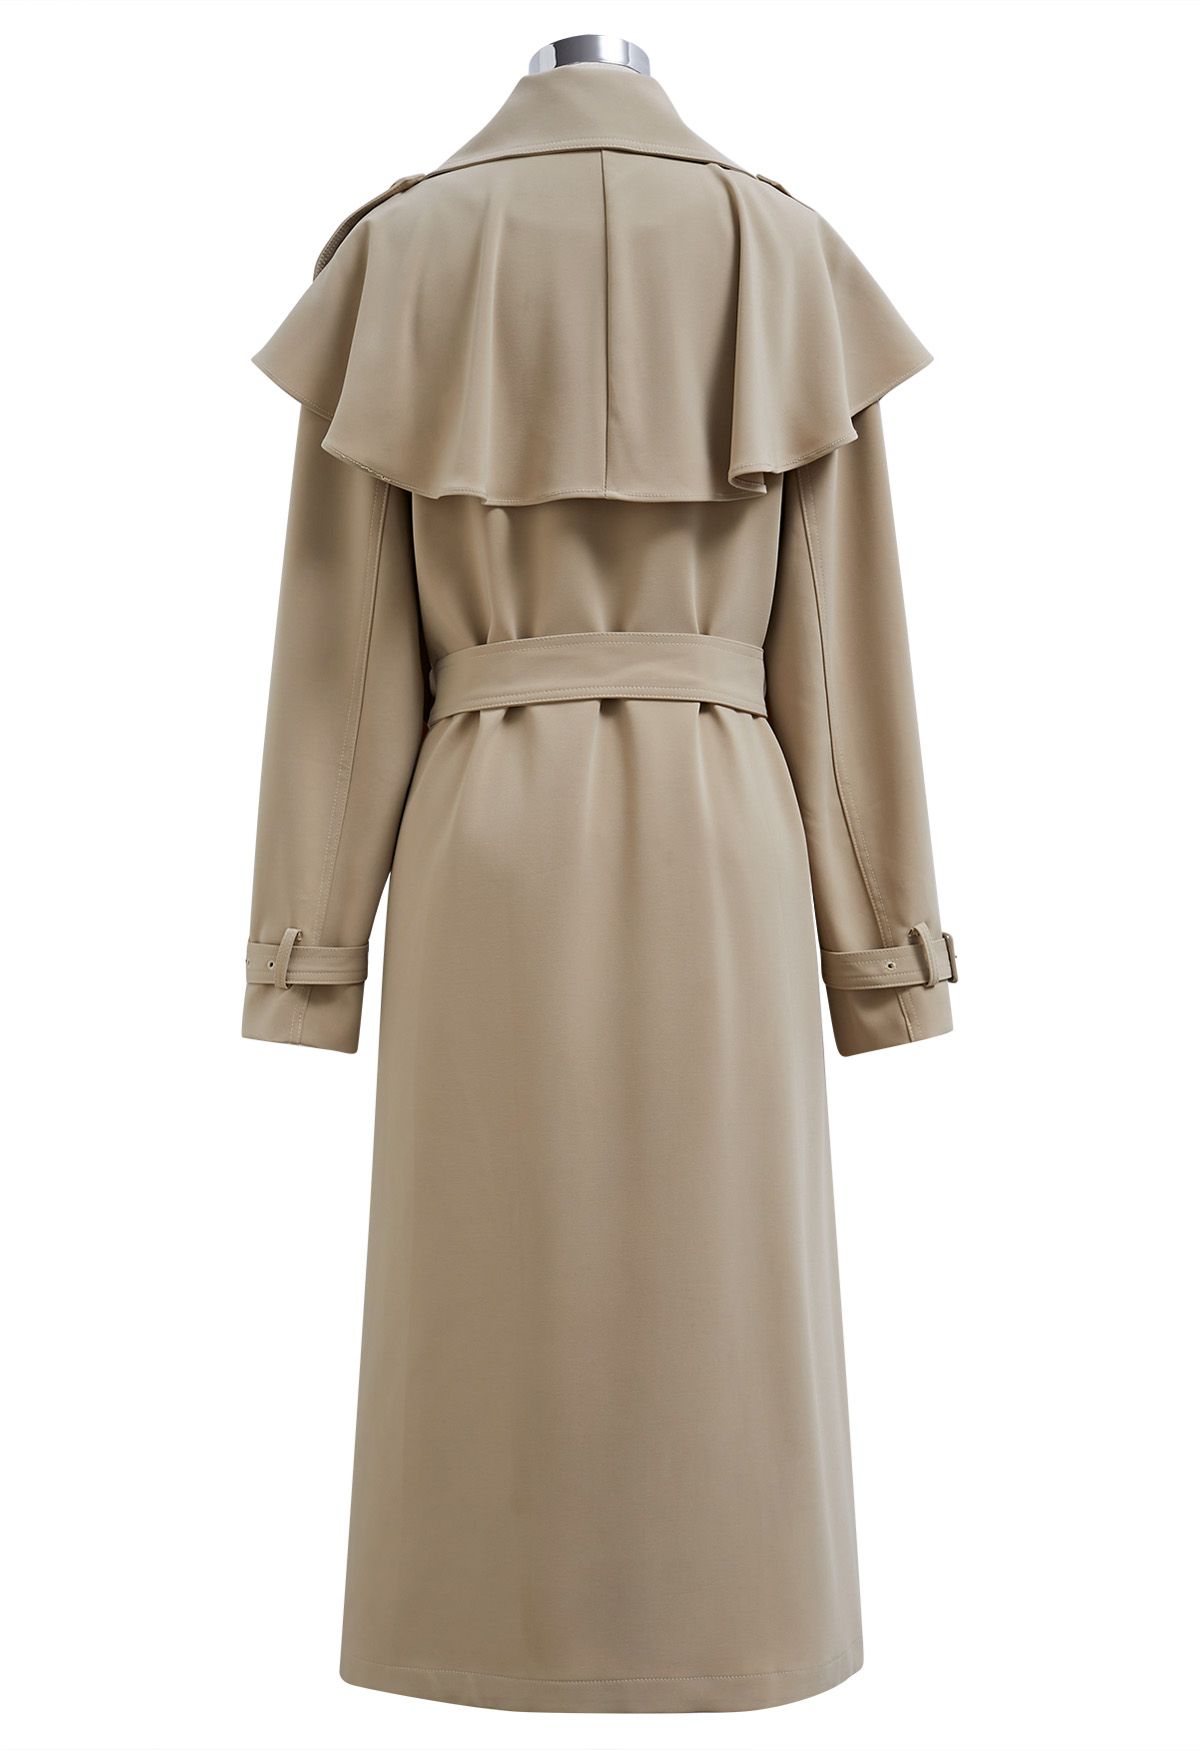 Ruffle Trimmed Belted Double-Breasted Trench Coat in Khaki